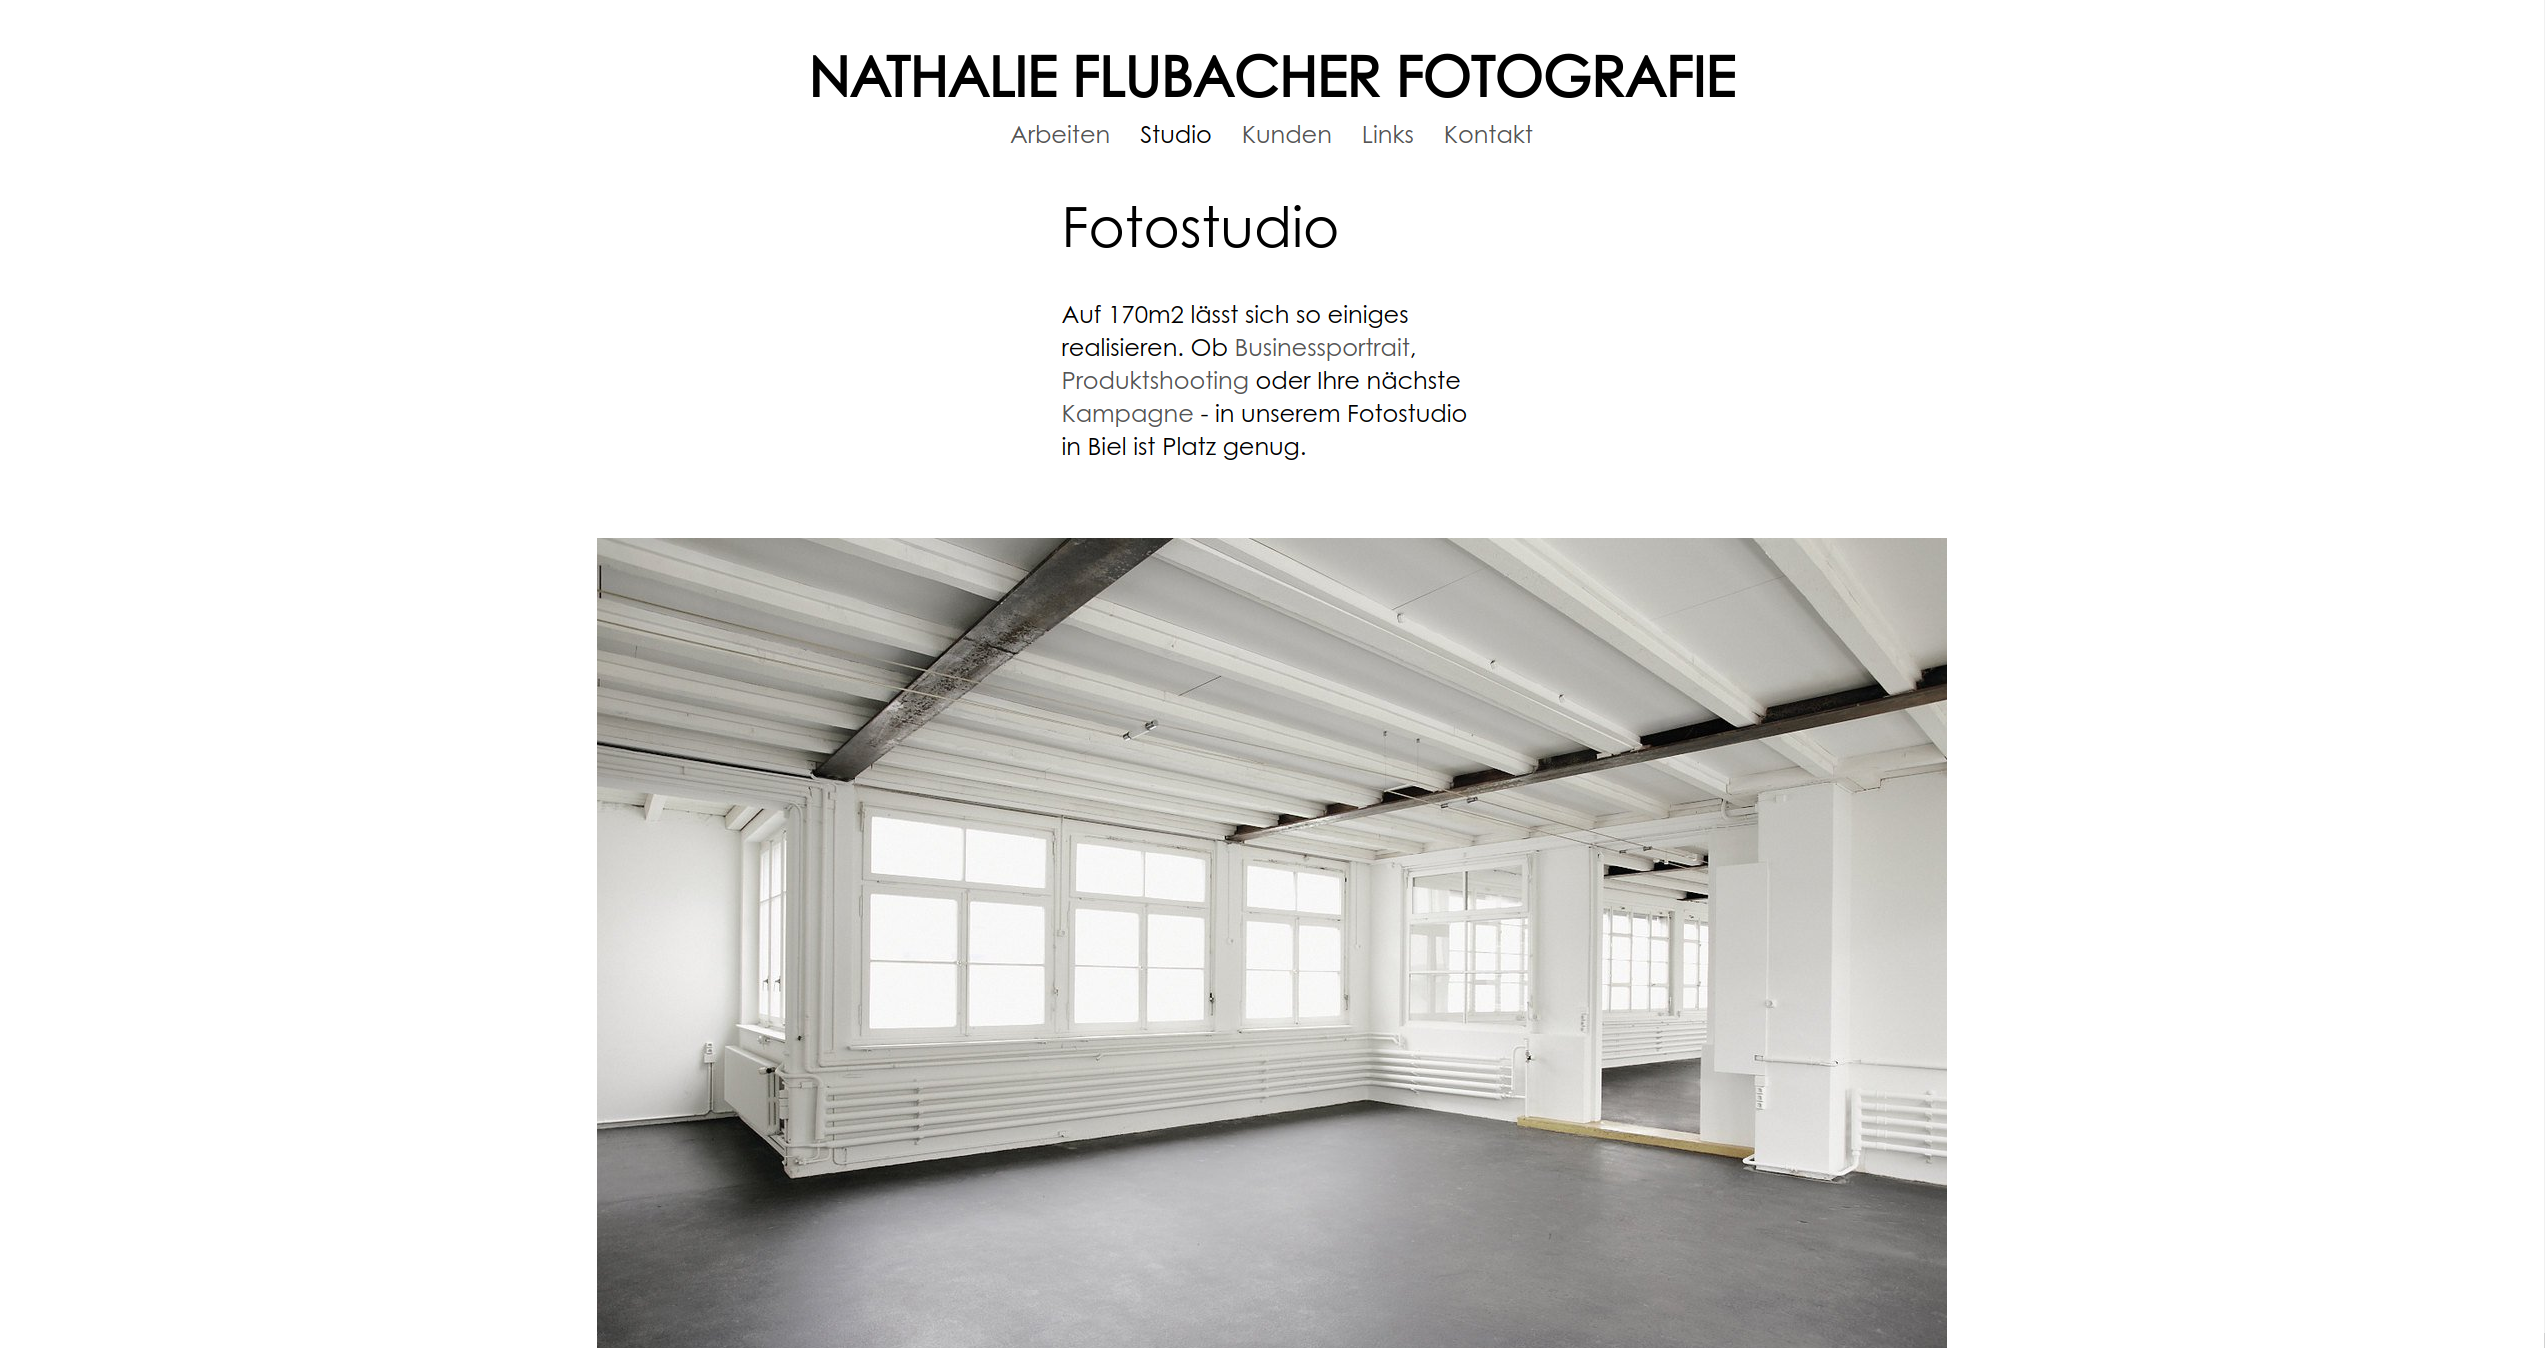 Text and image / Nathalie Flubacher Photography, Biel